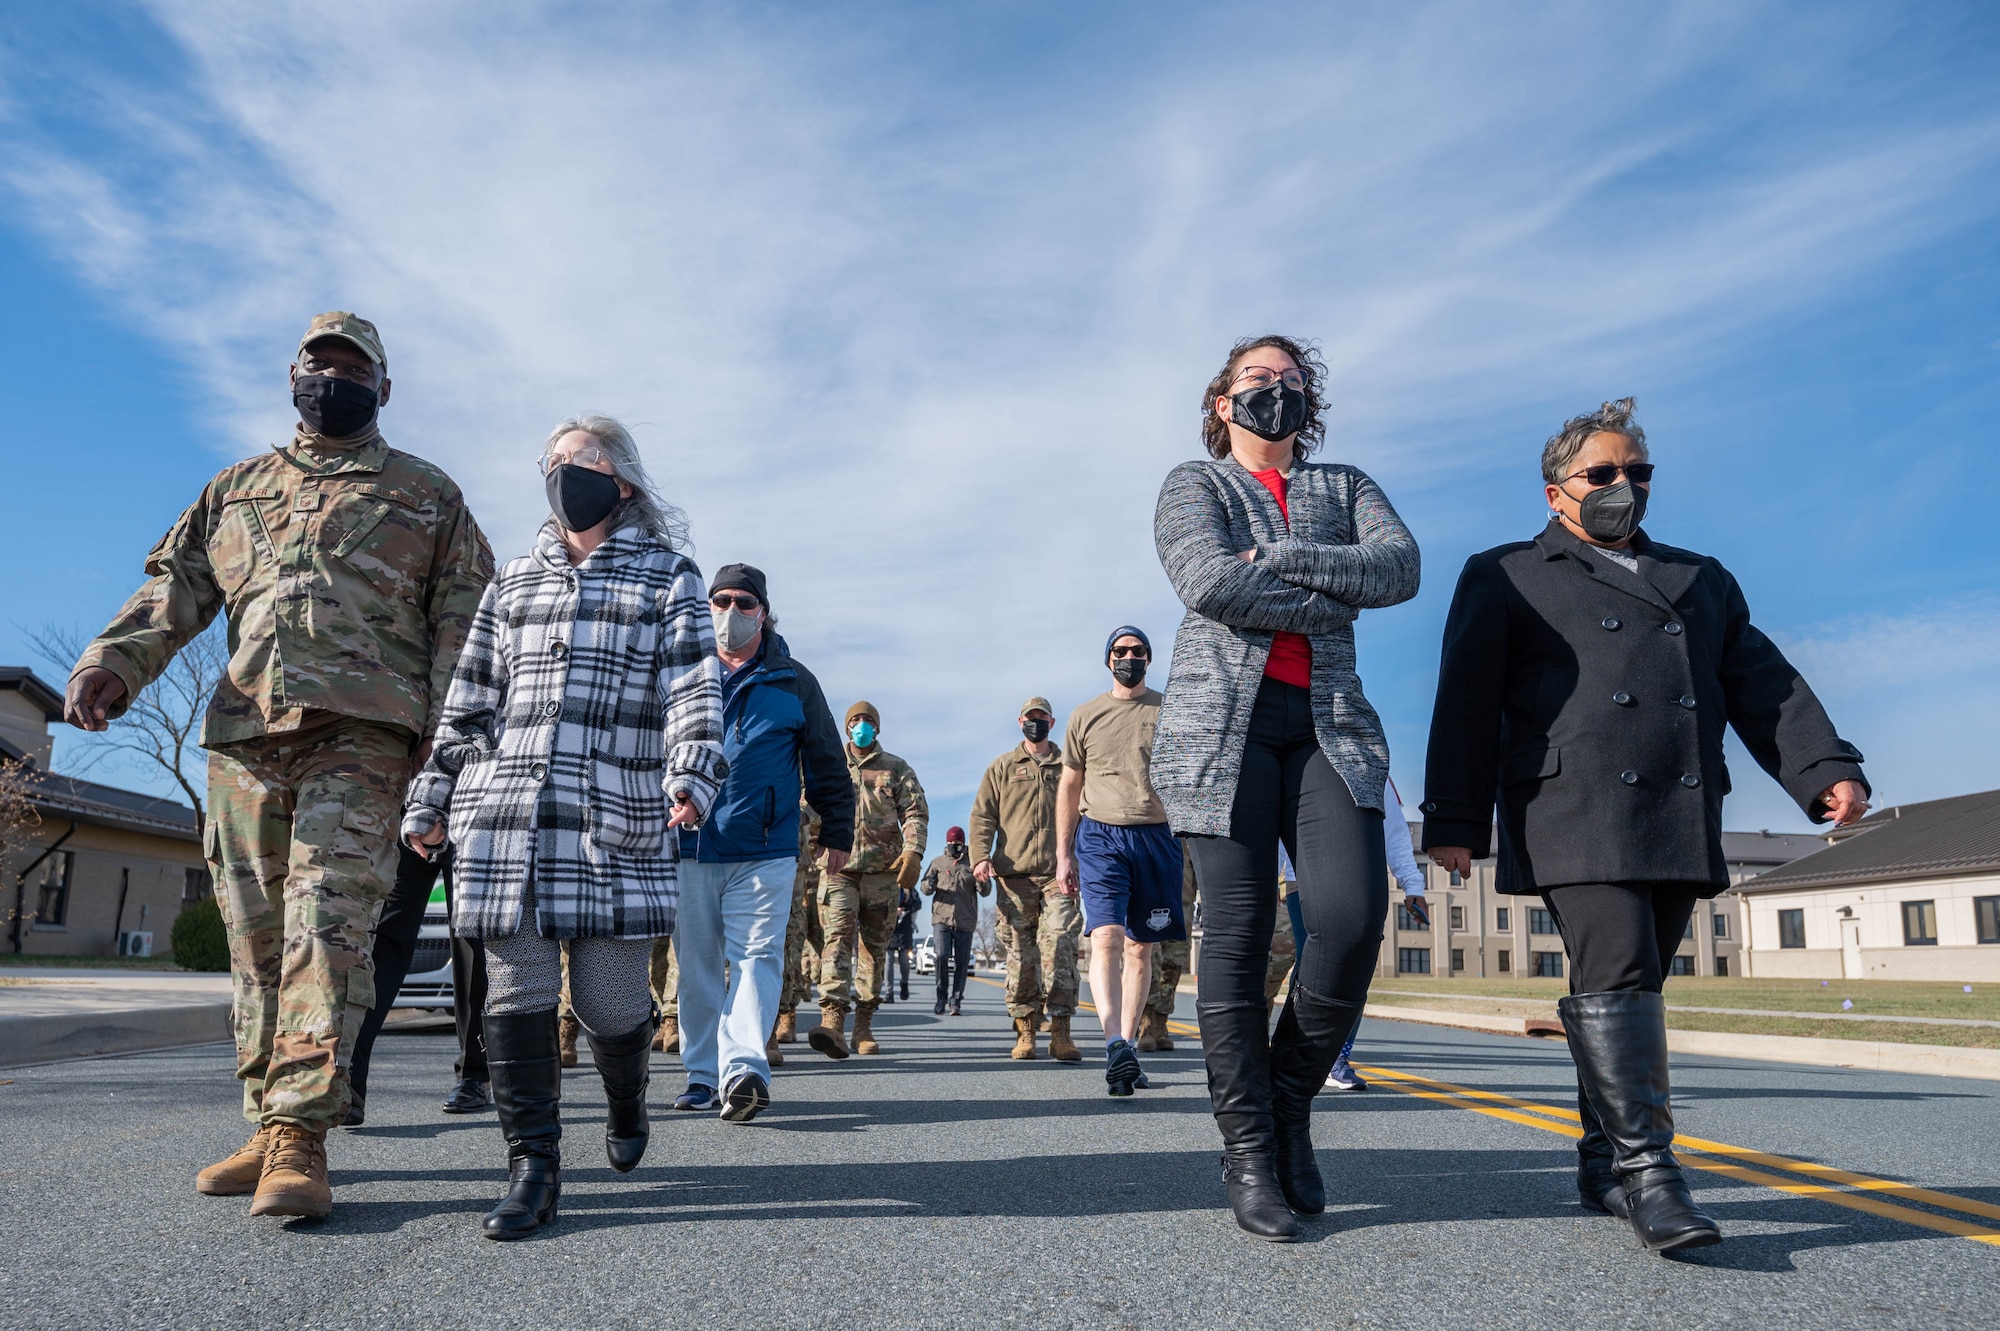 Members of Team Dover participate in the Martin Luther King Jr. Remembrance Day symbolic walk at Dover Air Force Base, Delaware, Jan. 19, 2022. The walk was organized by the African American Heritage Committee, the Dover Special Observances Committee and the 436th Airlift Wing Diversity and Inclusion Group. (U.S. Air Force photo by Mauricio Campino)